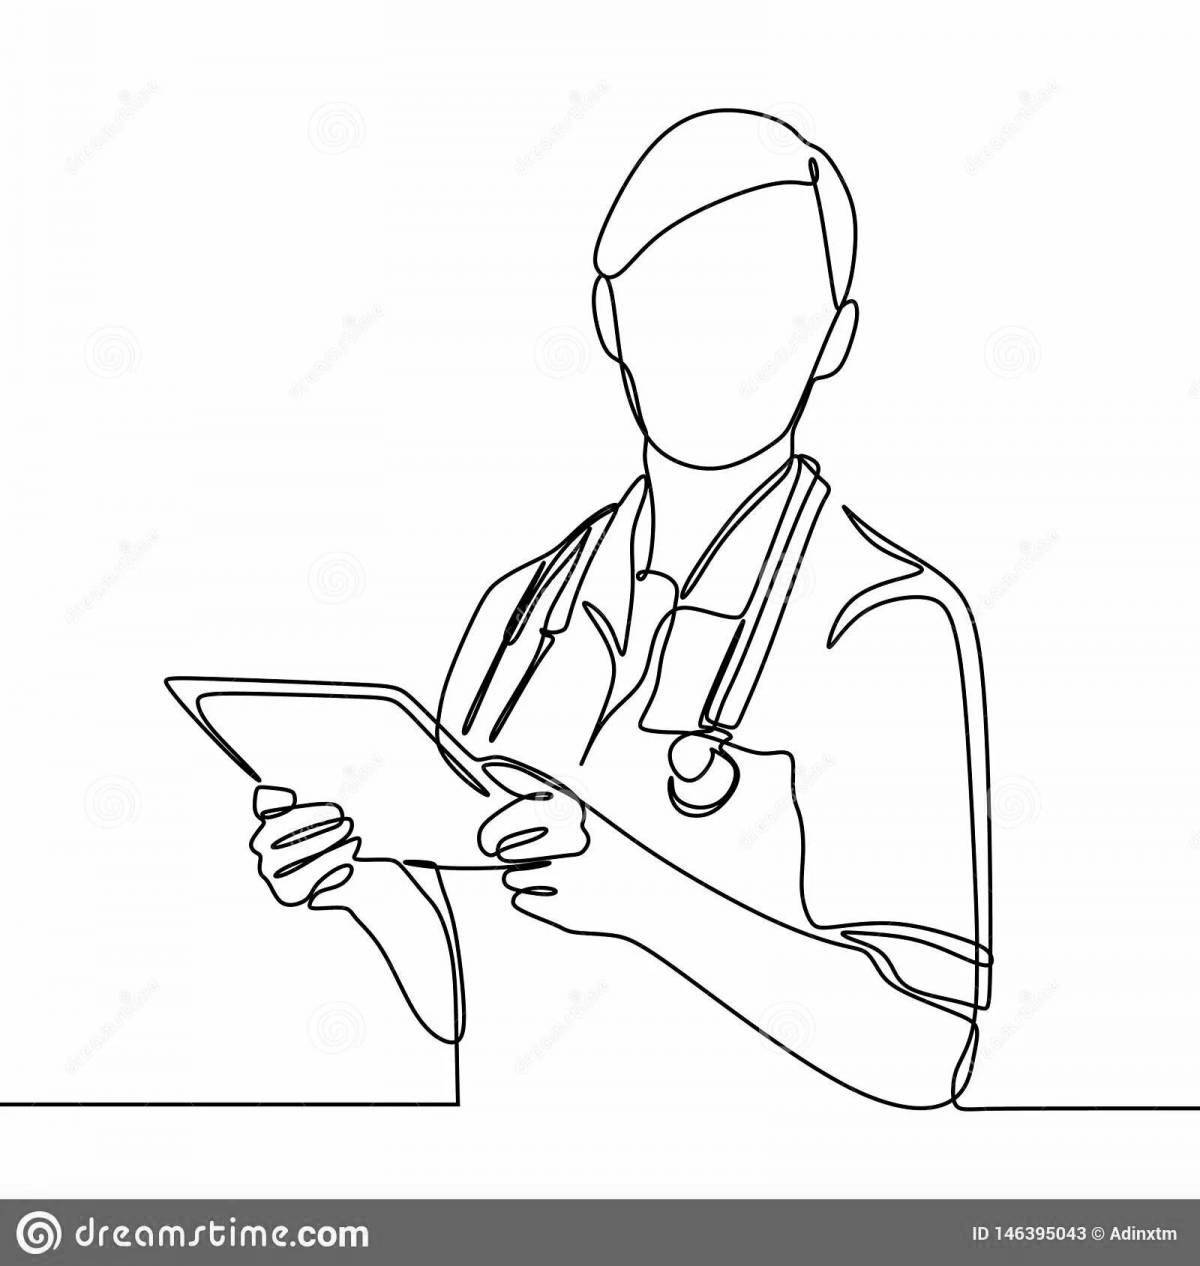 Colorful bright surgeon coloring page for kids